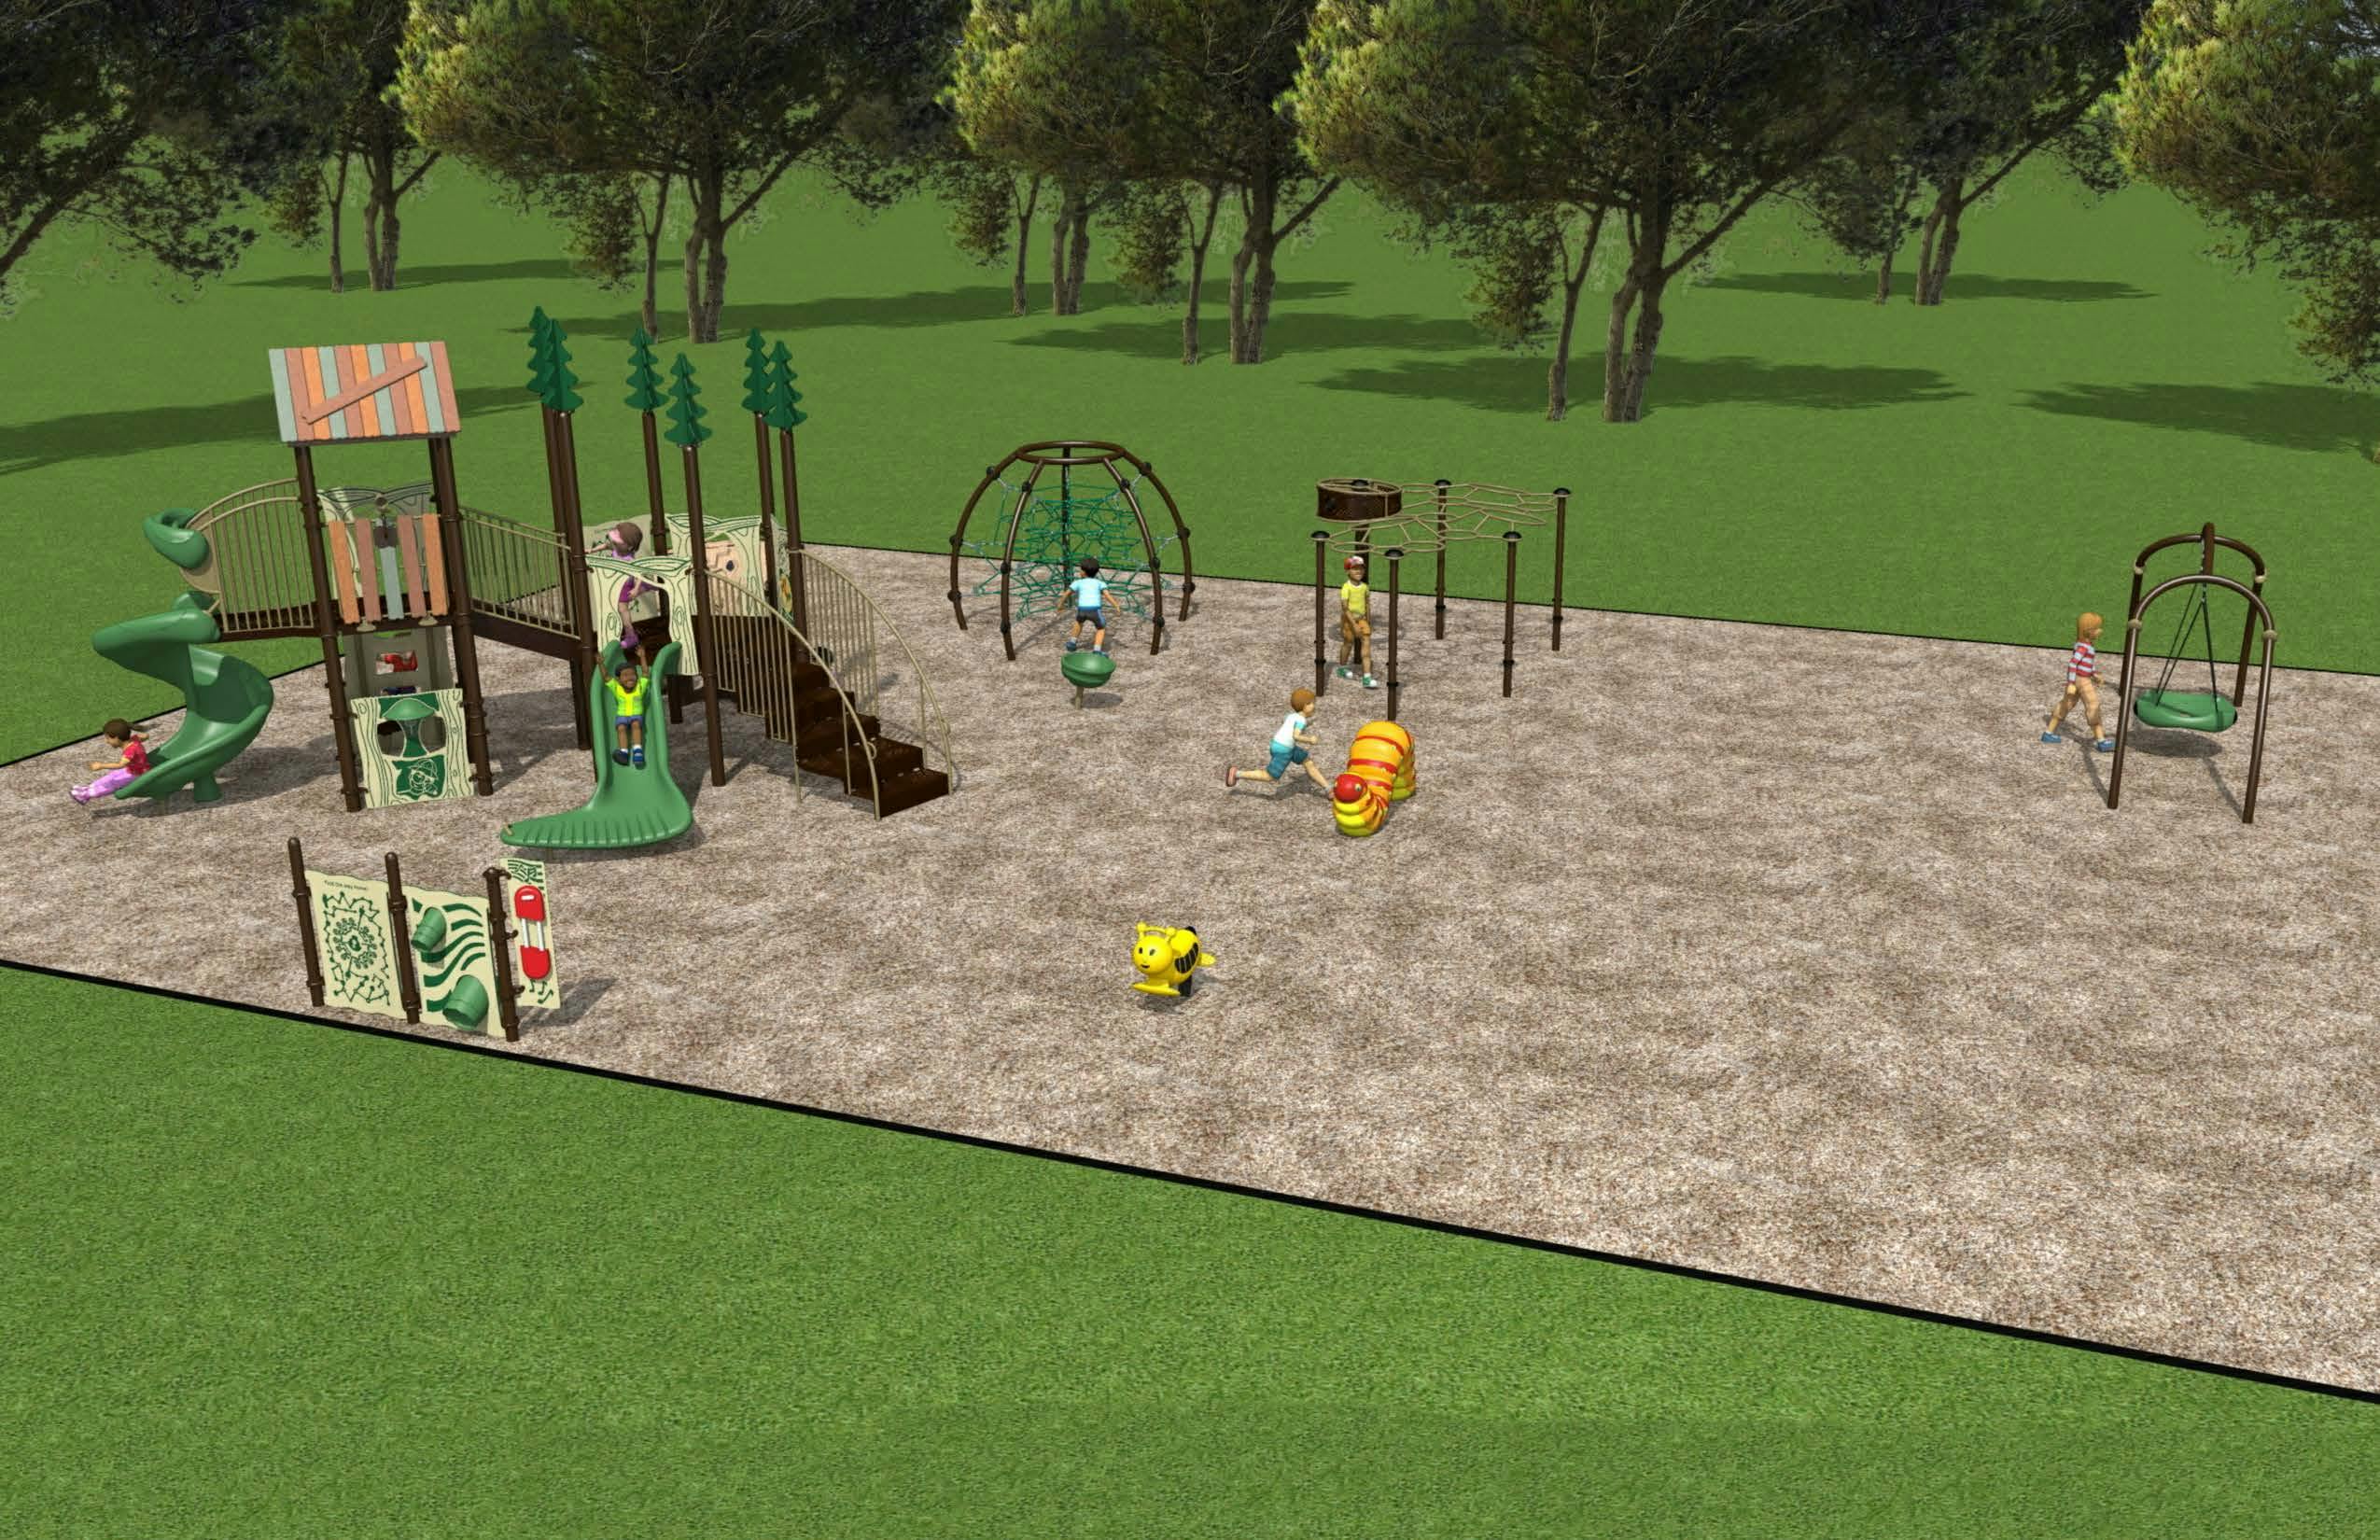 Ancaster Heights Park - Playground Design Renderings_Page_1_Image_0001.jpg